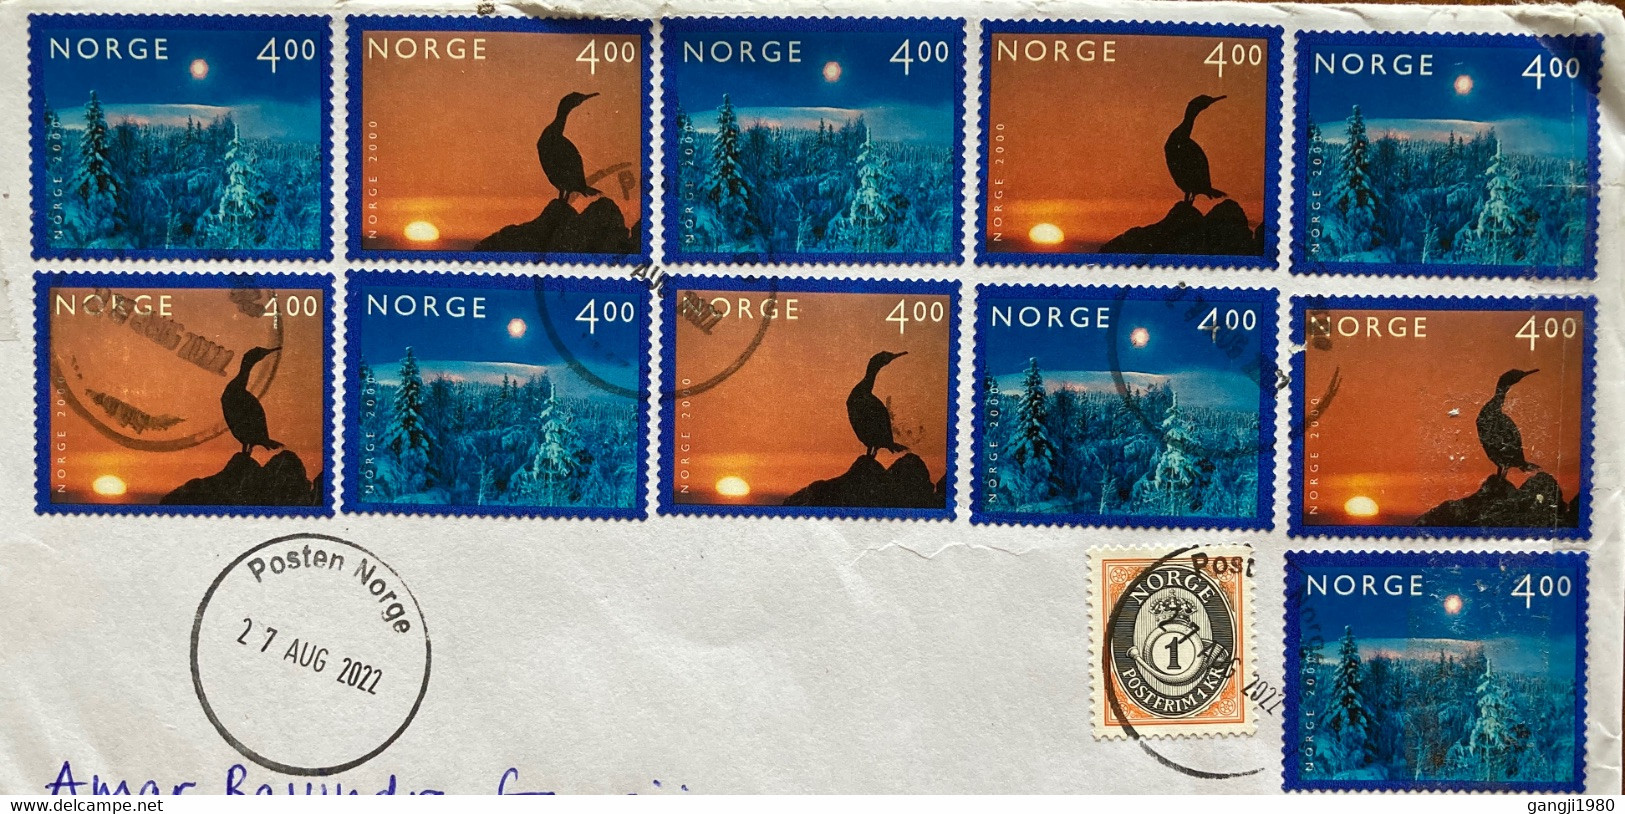 NORWAY,2022,USED COVER 1 SELF ADHESIVE YEAR 2000 MILLENNIUM STAMPS 11 AIRMAIL VIGNETTE,POSTEN NORGE CANCEL TO IN - Storia Postale